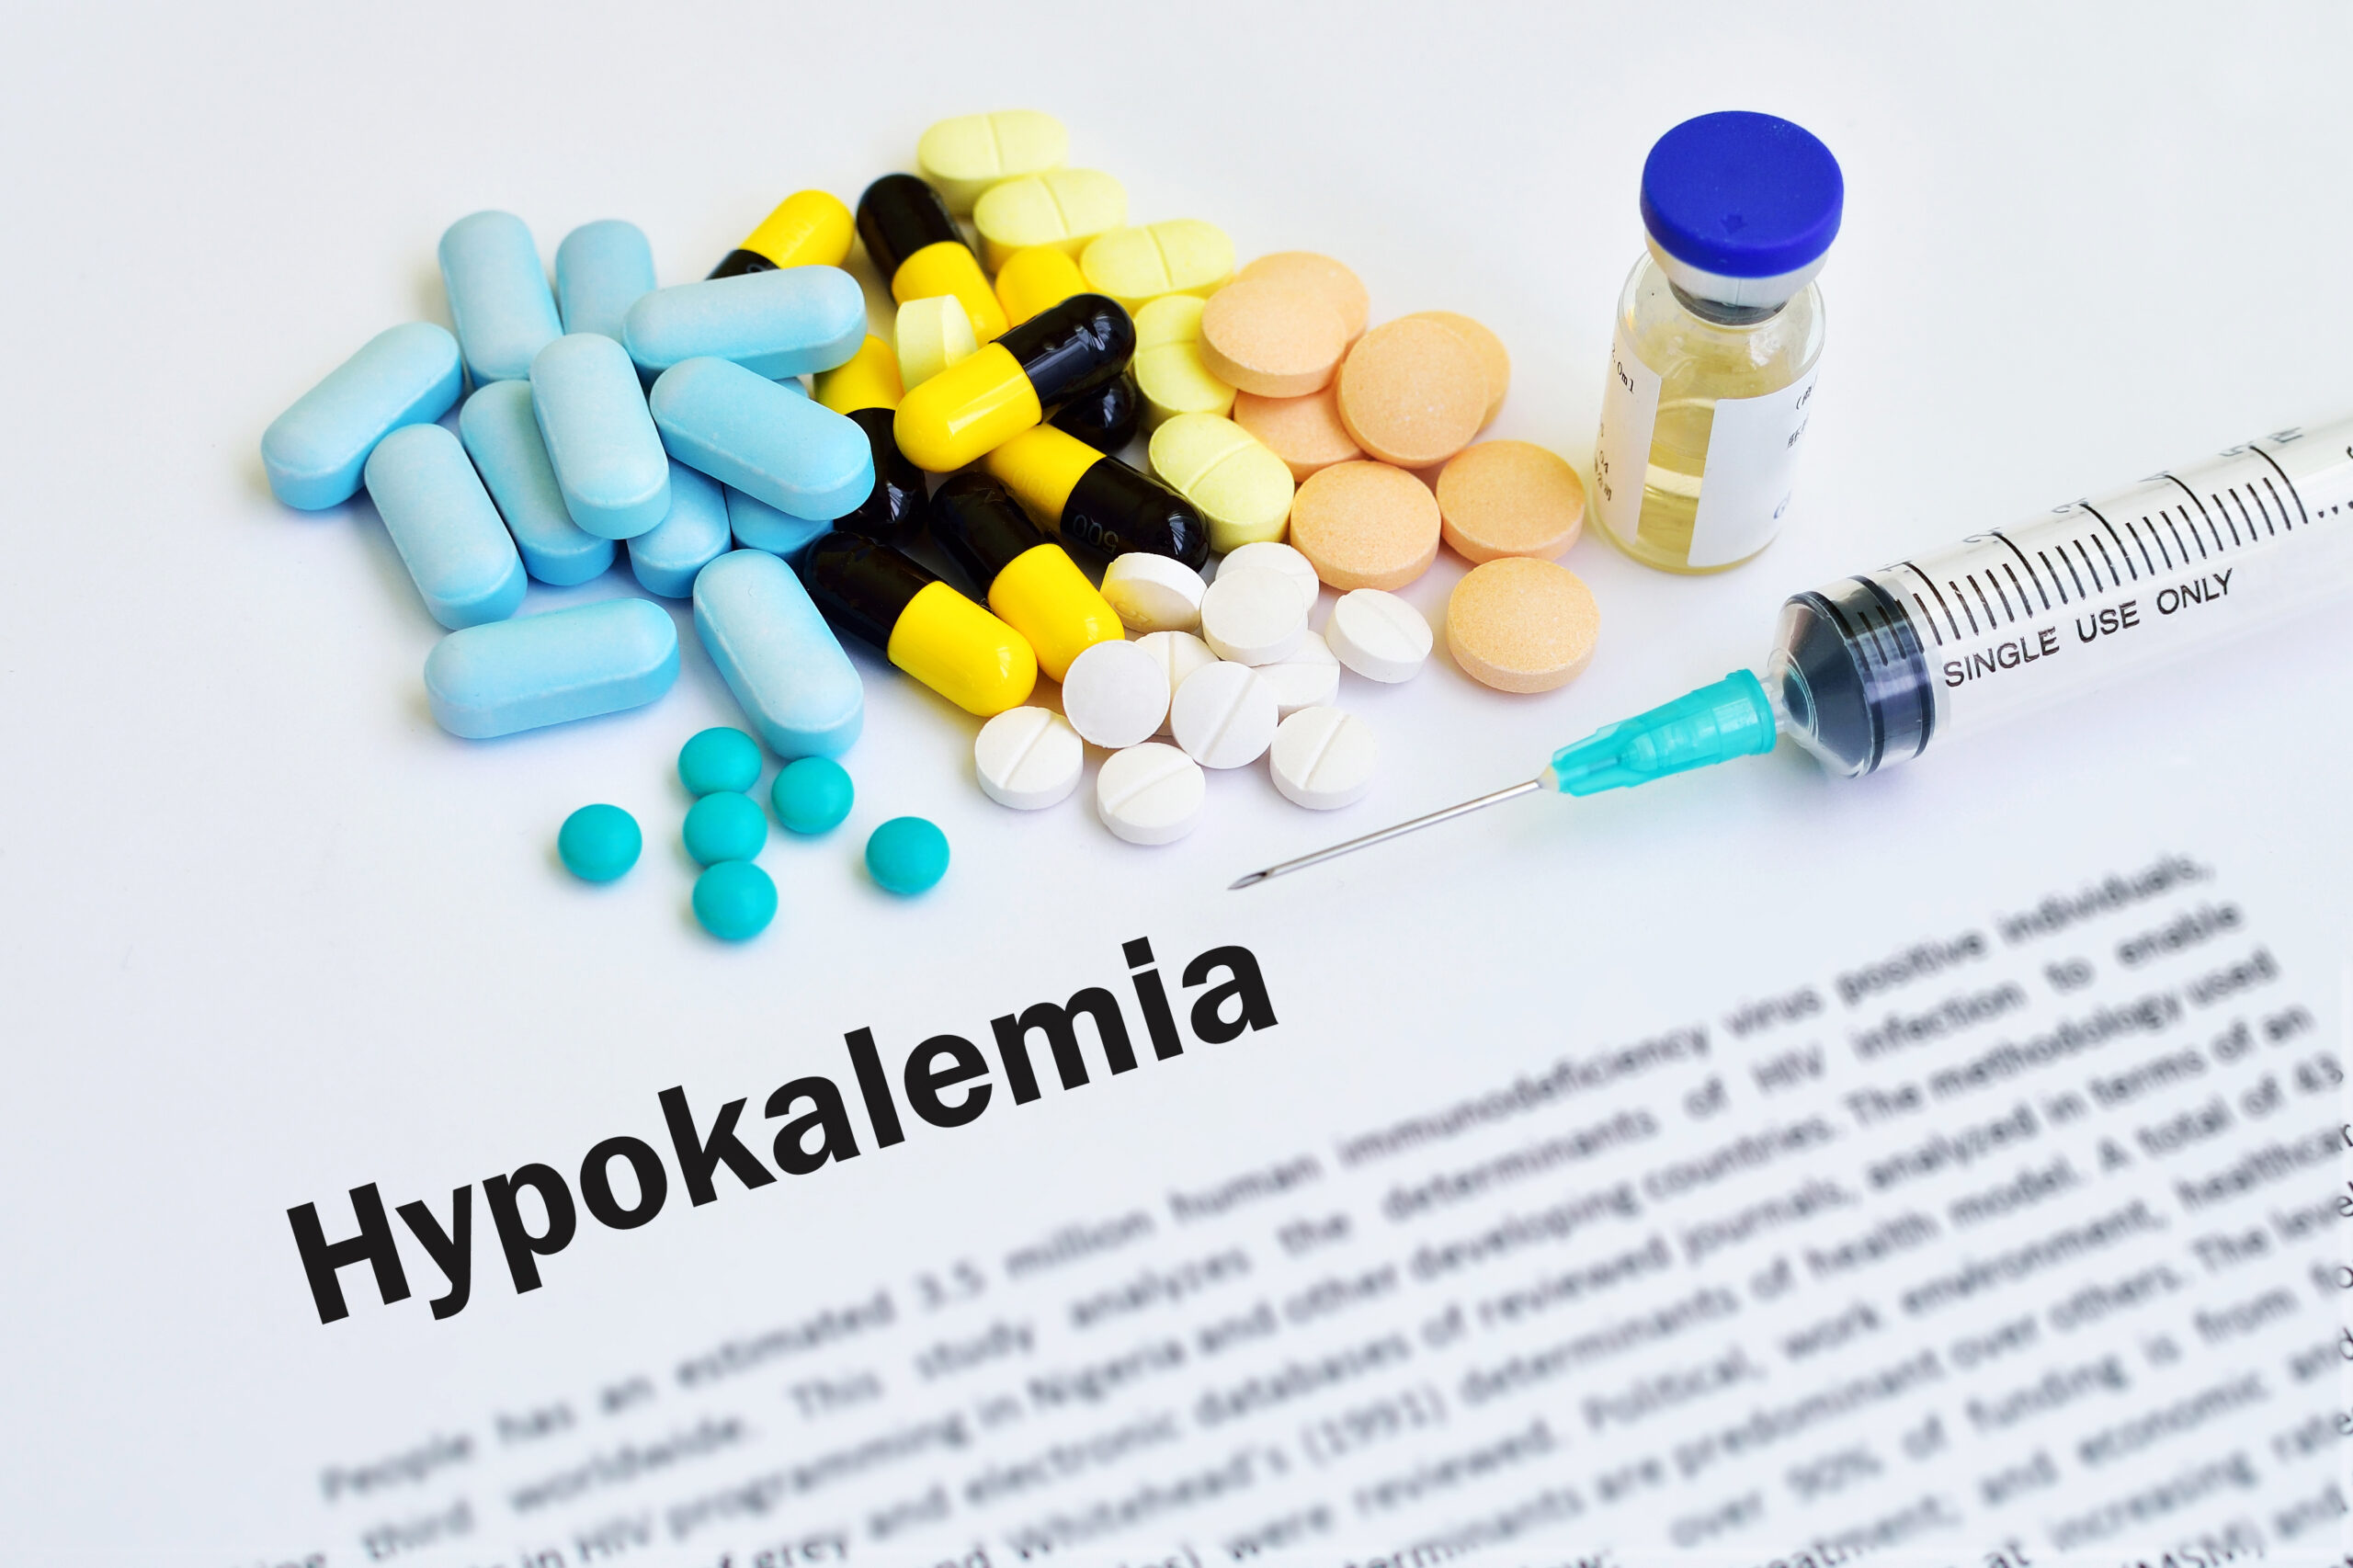 Hypokalemia: What Is, Causes, Symptoms, Risk Factors, and Treatment